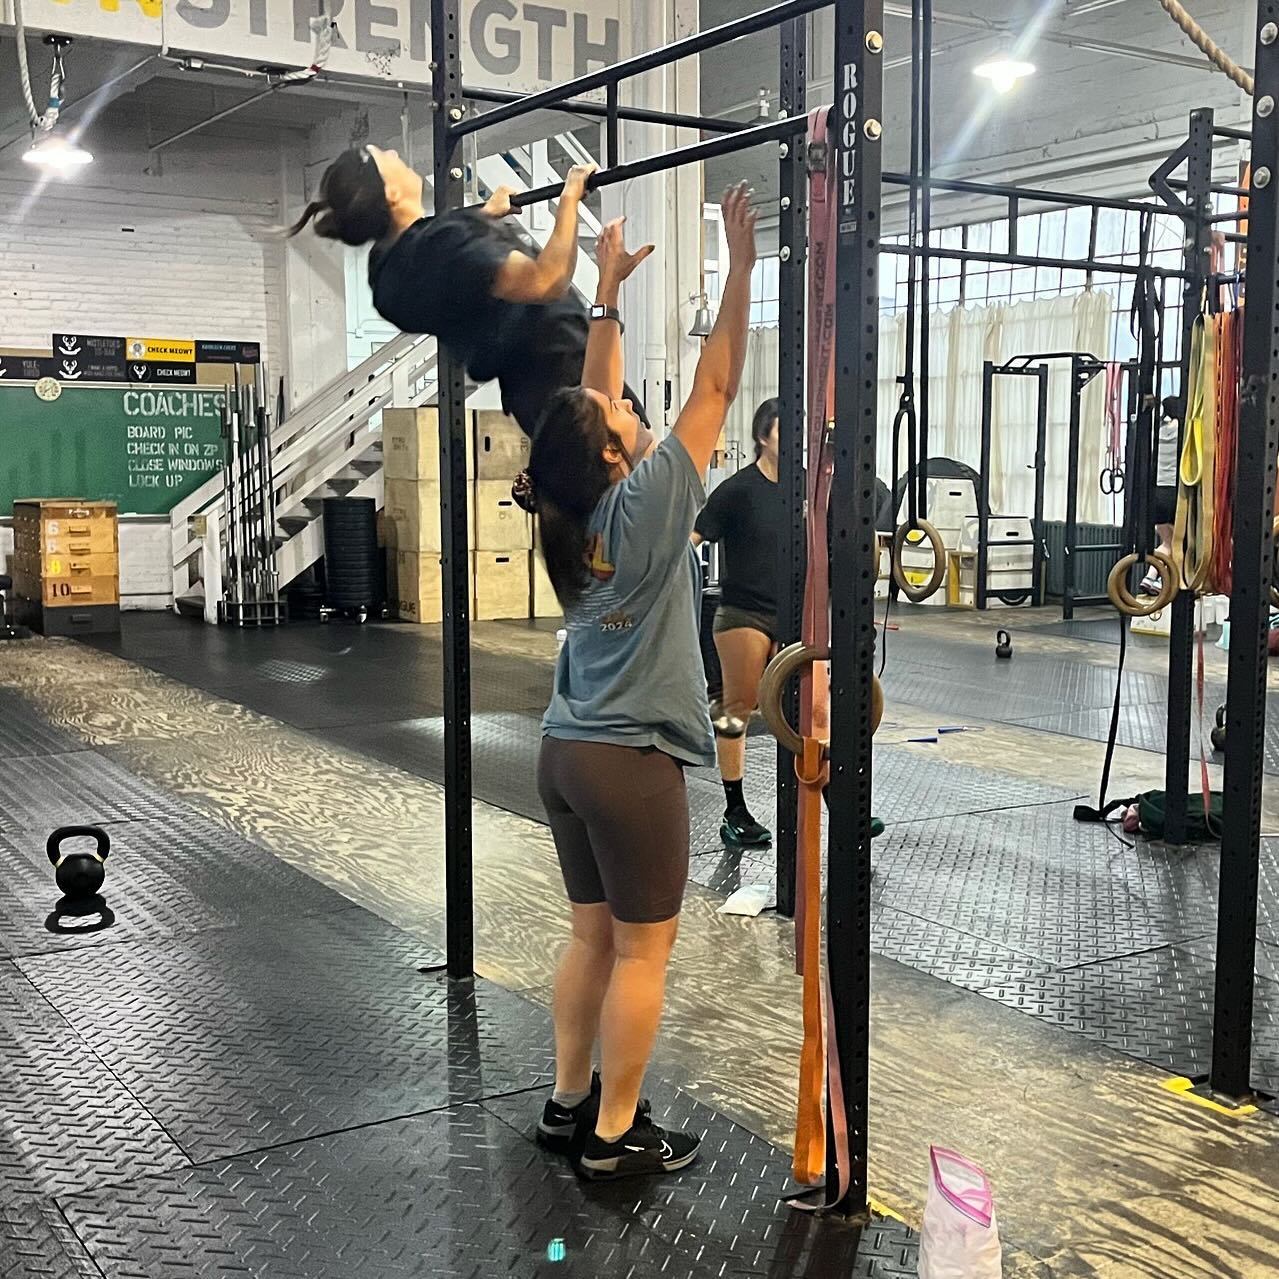 How are your pull-ups? Melanie and Amanda are crushing it here! 

Pull-ups are challenging but consistently practicing is key. Some good practice exercises include: ring rows, banded pull-ups, pull-up negatives, jumping pull-ups. Bored of the normal pull-ups? Try chest to bar!

 #BirdtownStrength #BirdtownStrong #FunctionalFitness #BeBetter #RedefiningStrength #TeamWorkMakesTheDreamWork #WeAreBirdtown #Lakewood #Ohio #LakewoodOhio